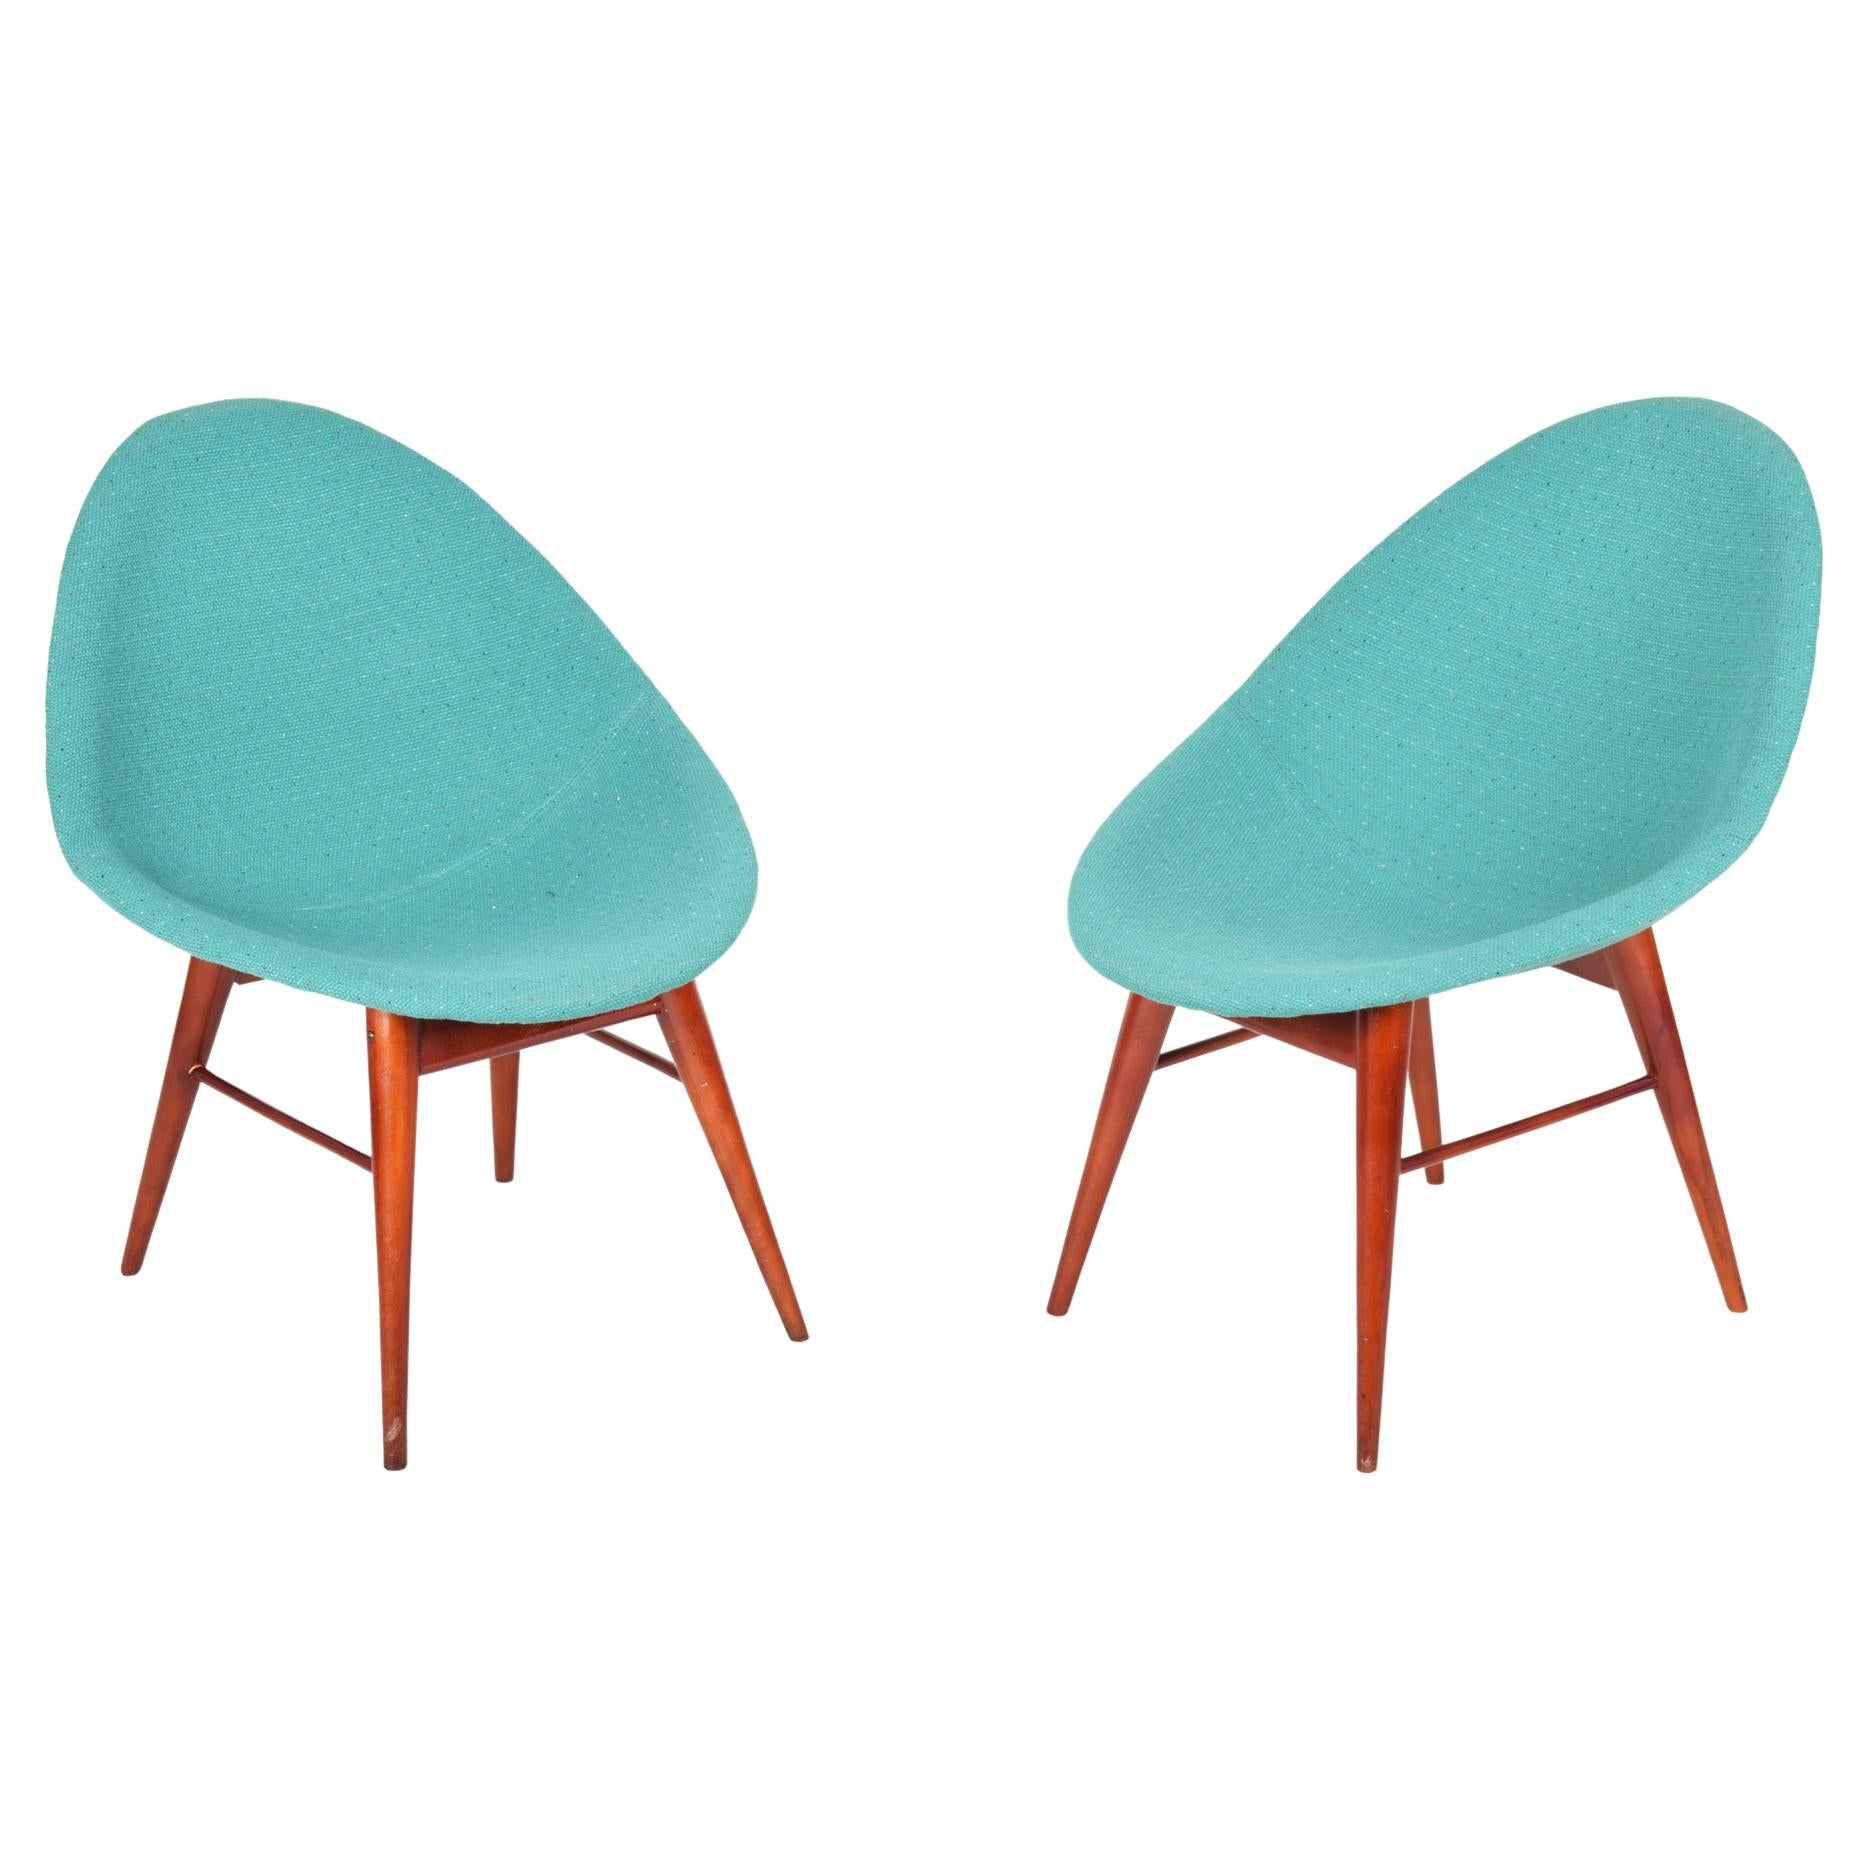 Pair of Blue Mid-Century Chairs, Made in 1960s Czechia, Fully Restored, Navrátil